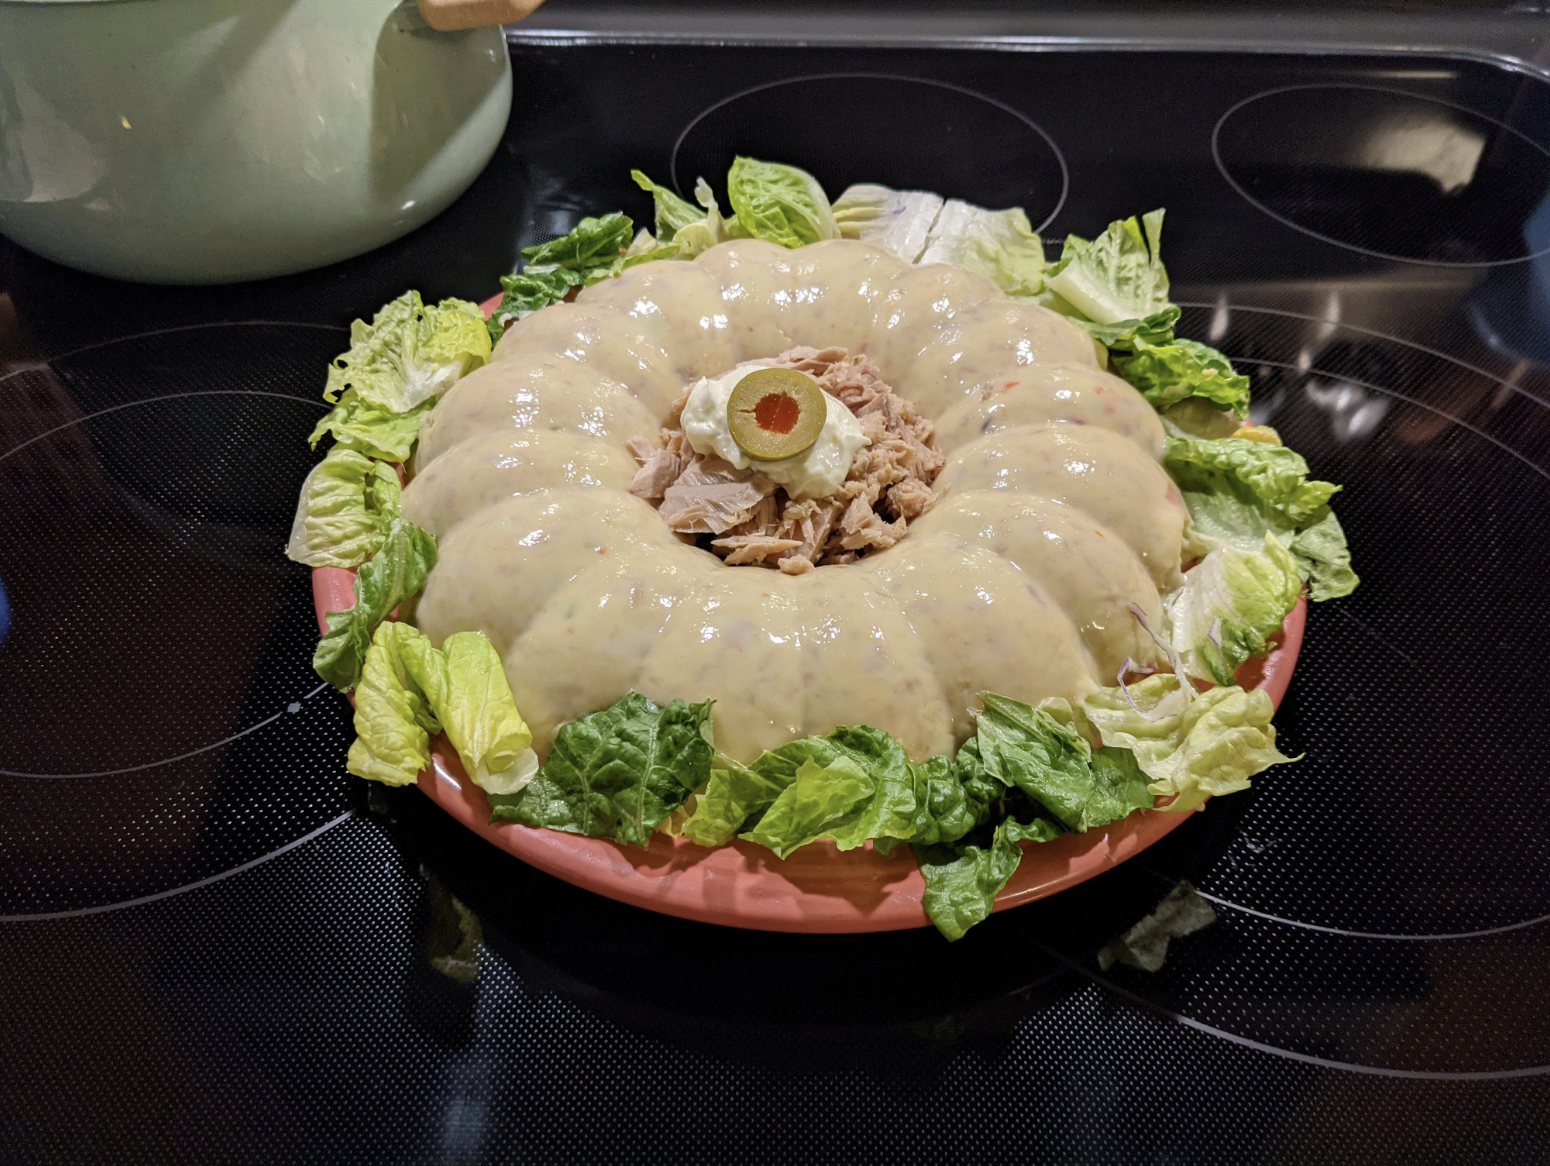 A gelatin mold filled with tuna and garnished with lettuce and olives, presented on a kitchen counter